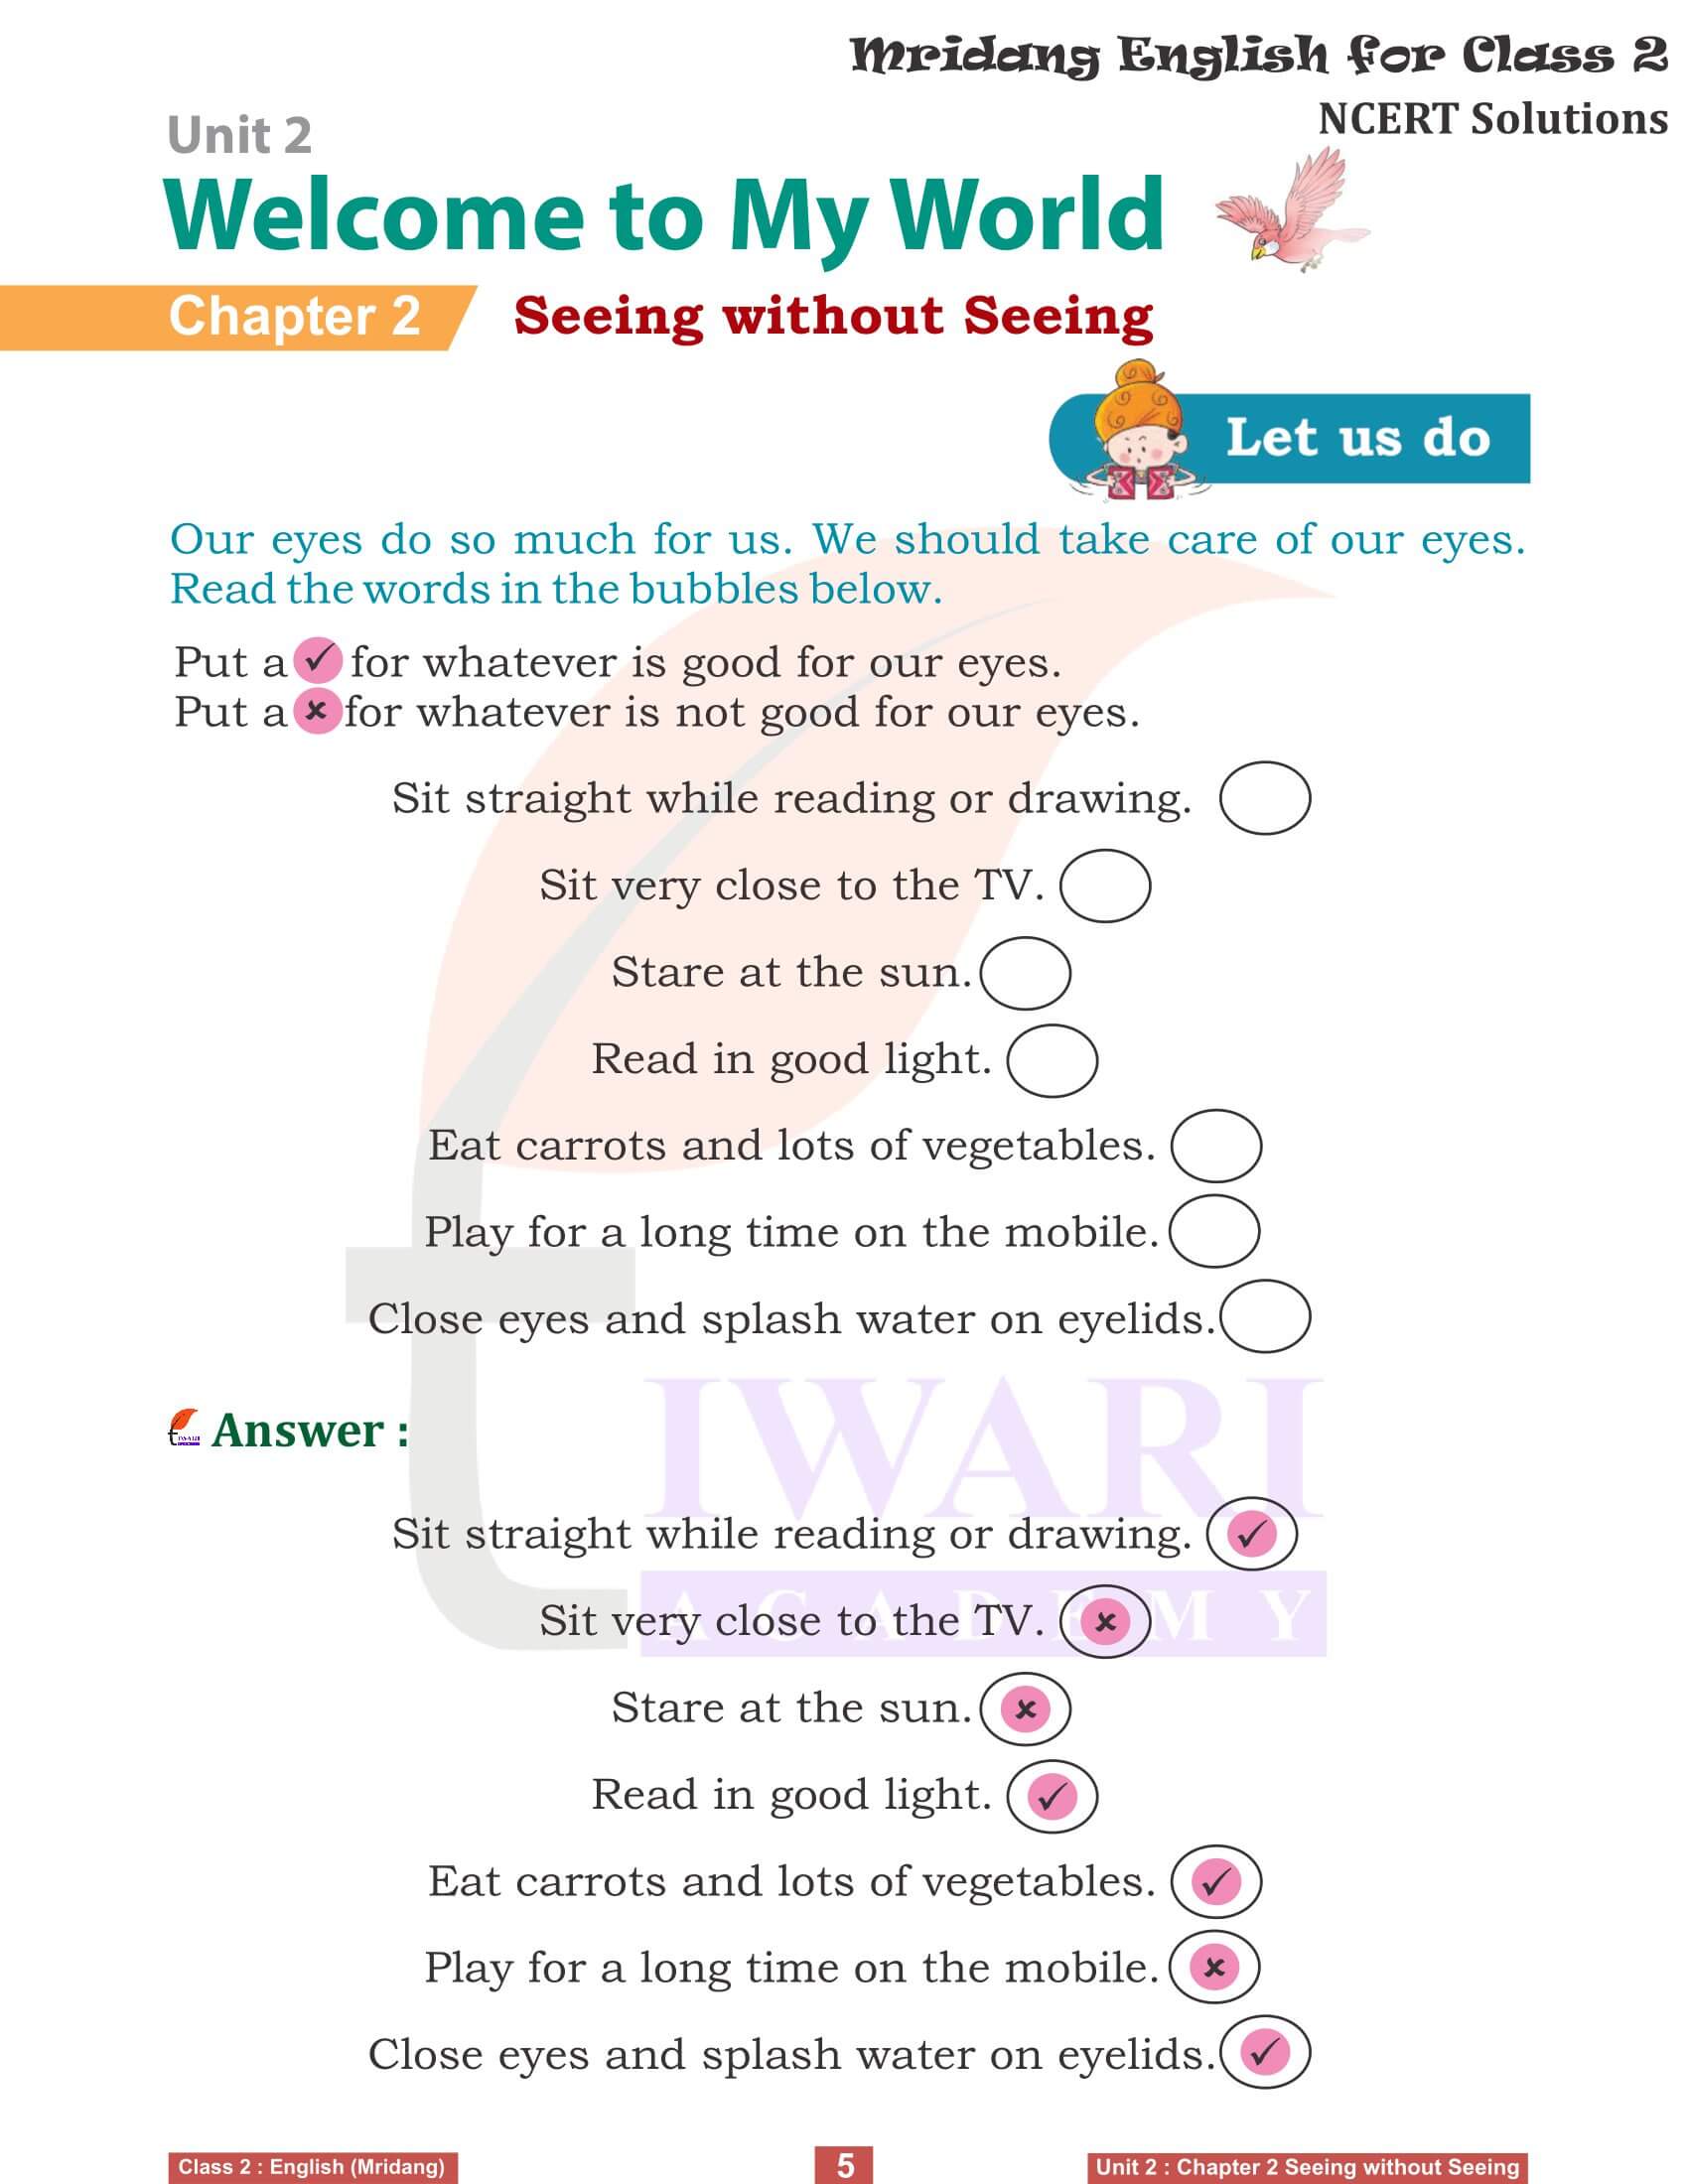 NCERT Solutions for Class 2 English Mridang Unit 2 Welcome to My World Chapter 2 Seeing without Seeing Answers